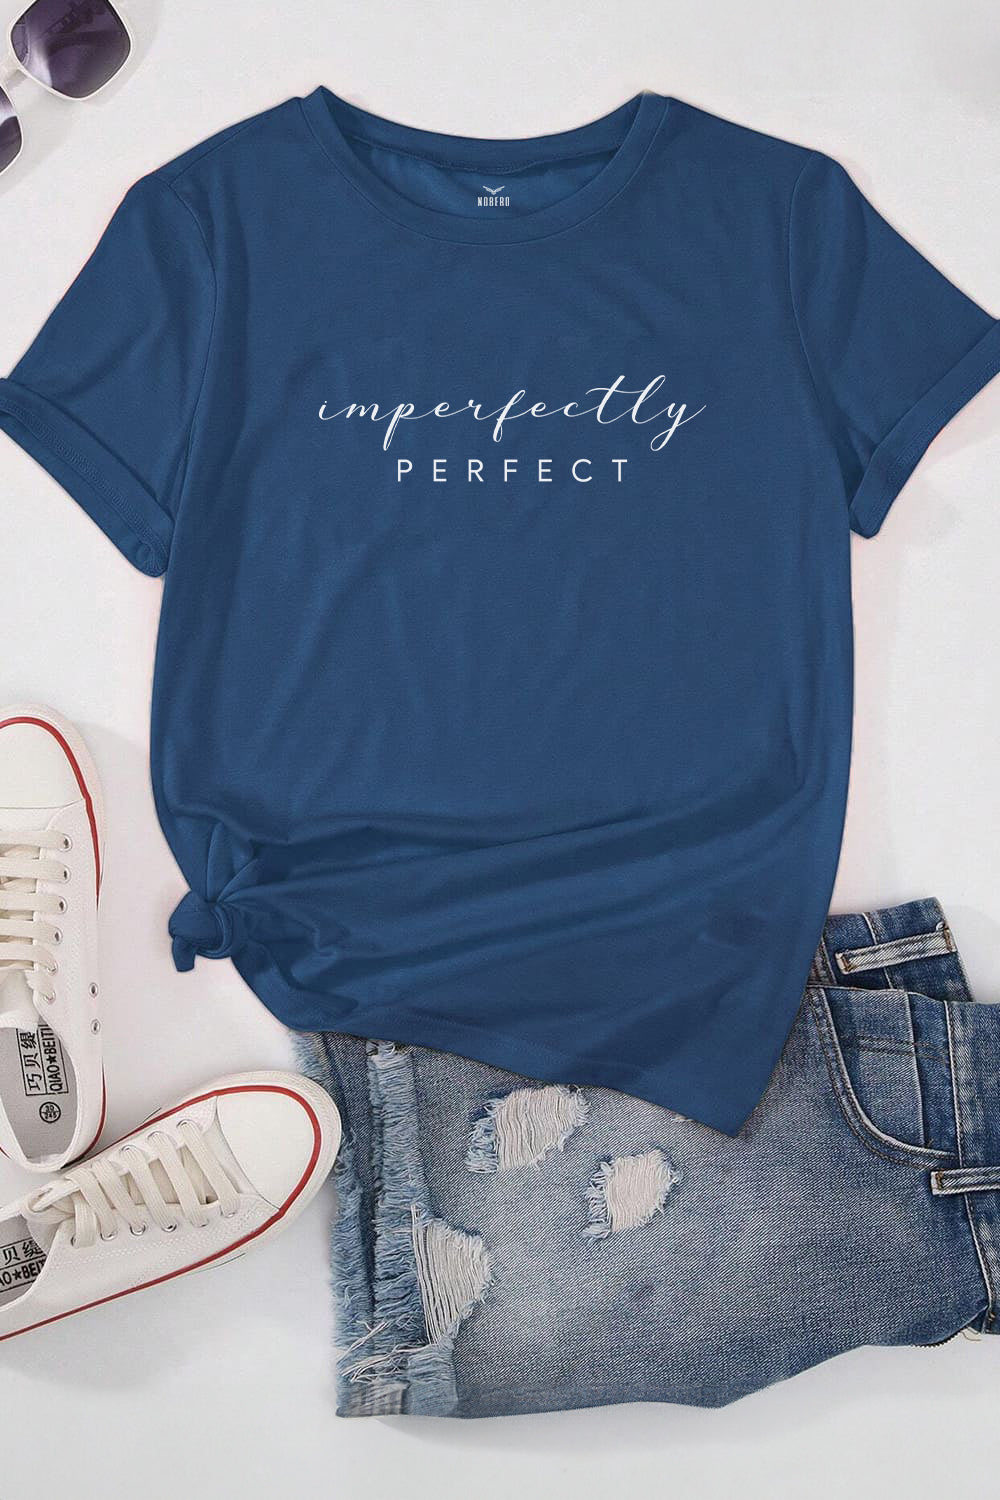 Boyfriend Imperfectly Perfect Classic Fit T-Shirt